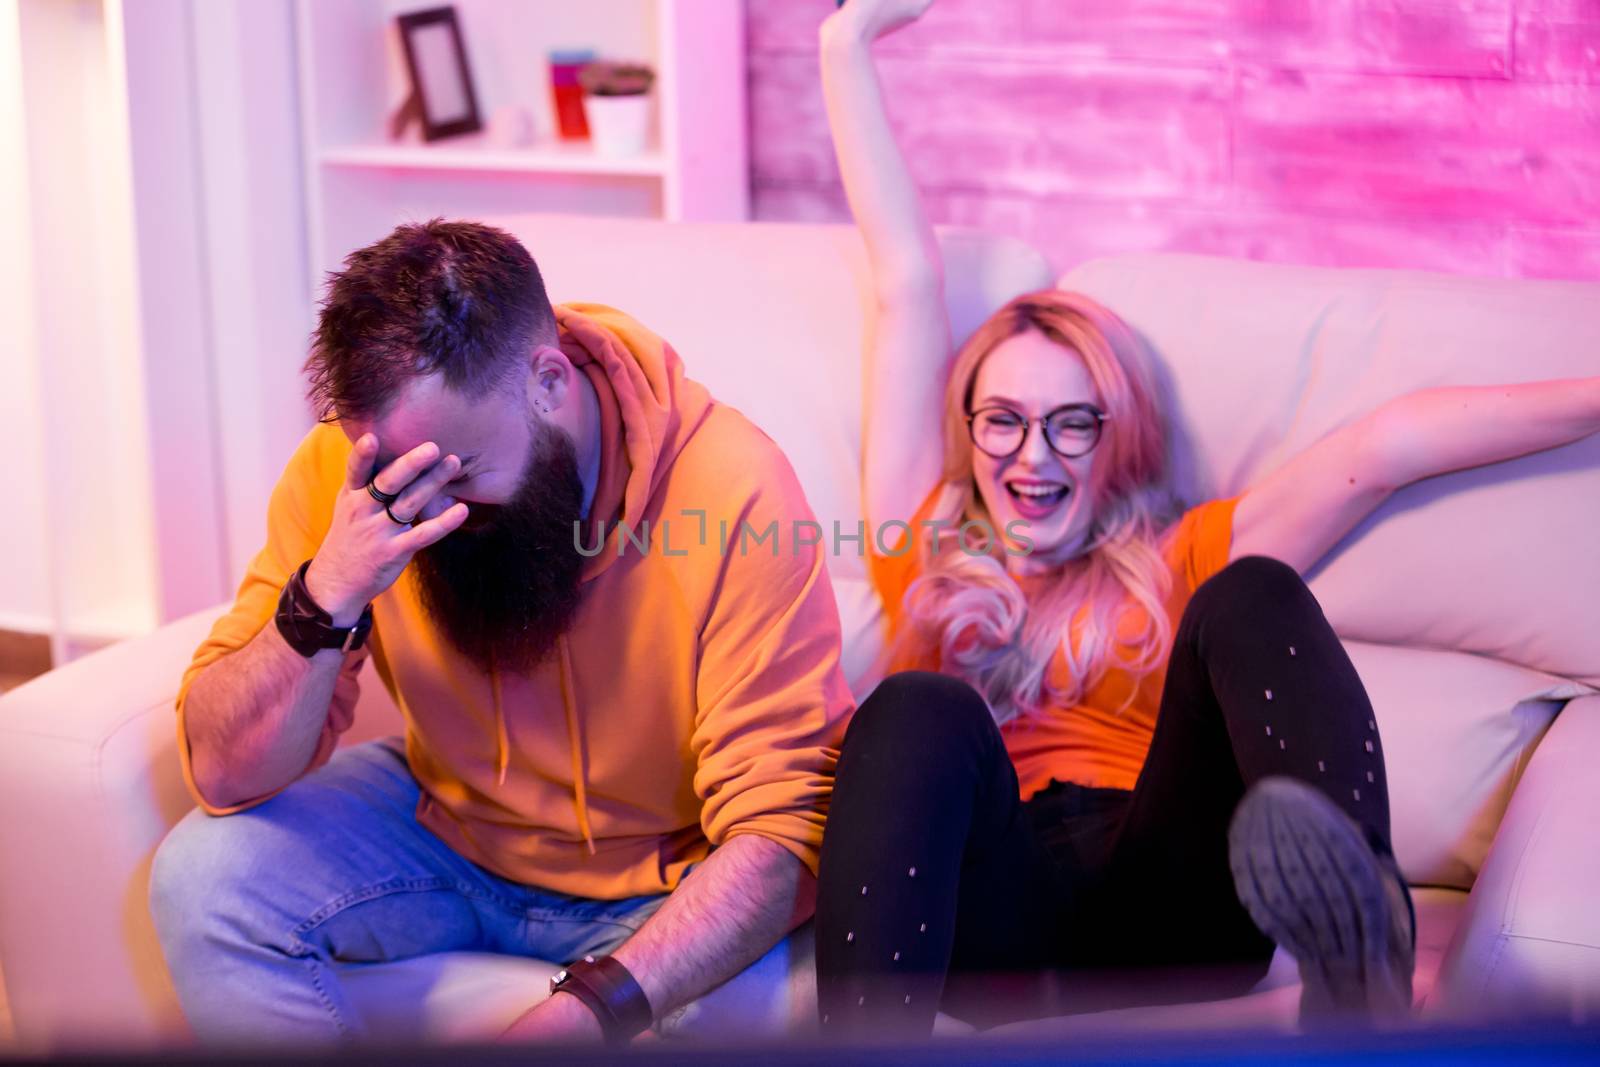 Blond girlfriend happy to win against her boyfriend on video games sitting on sofa. Room with neon lights.